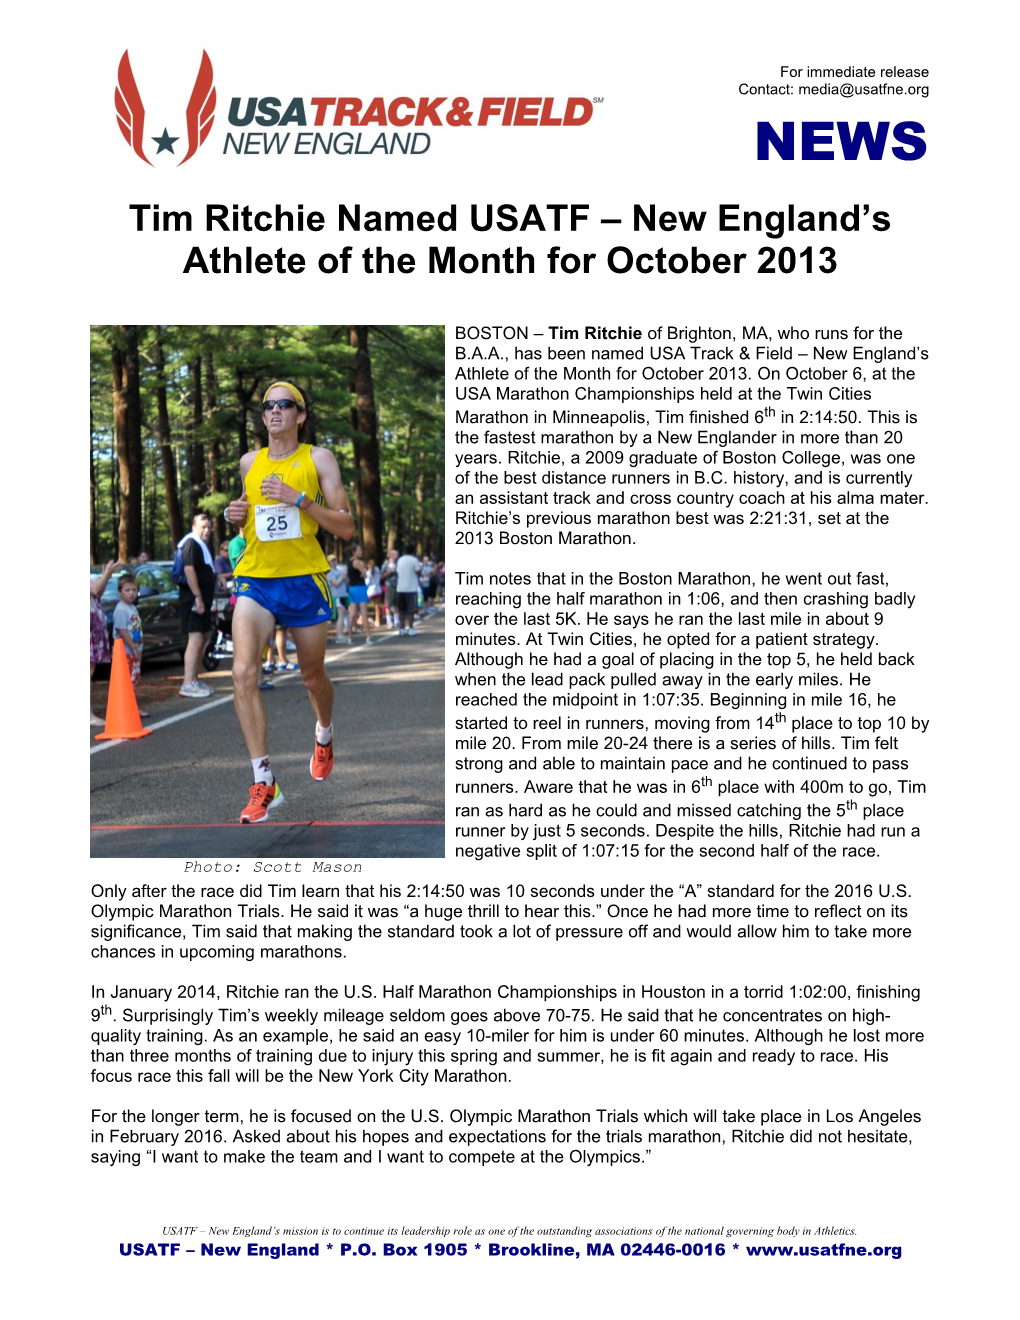 Tim Ritchie Named USATF – New England's Athlete of the Month For